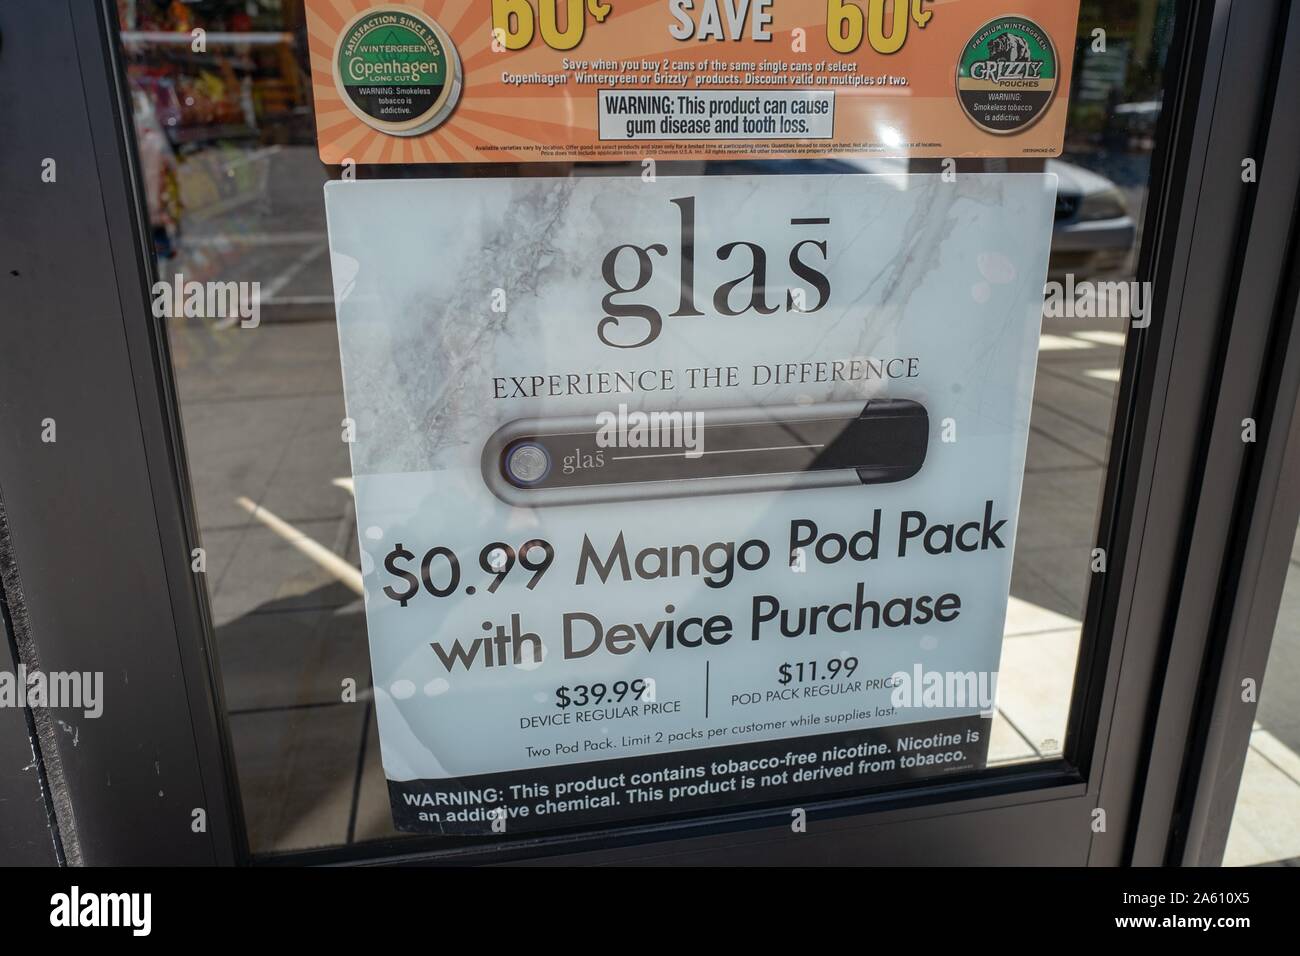 Close-up of sign for Glas nicotine vaporizer, used for vaping, with text advertising fruit flavors including a mango flavor, at a convenience store in San Ramon, California, September 25, 2019. () Stock Photo